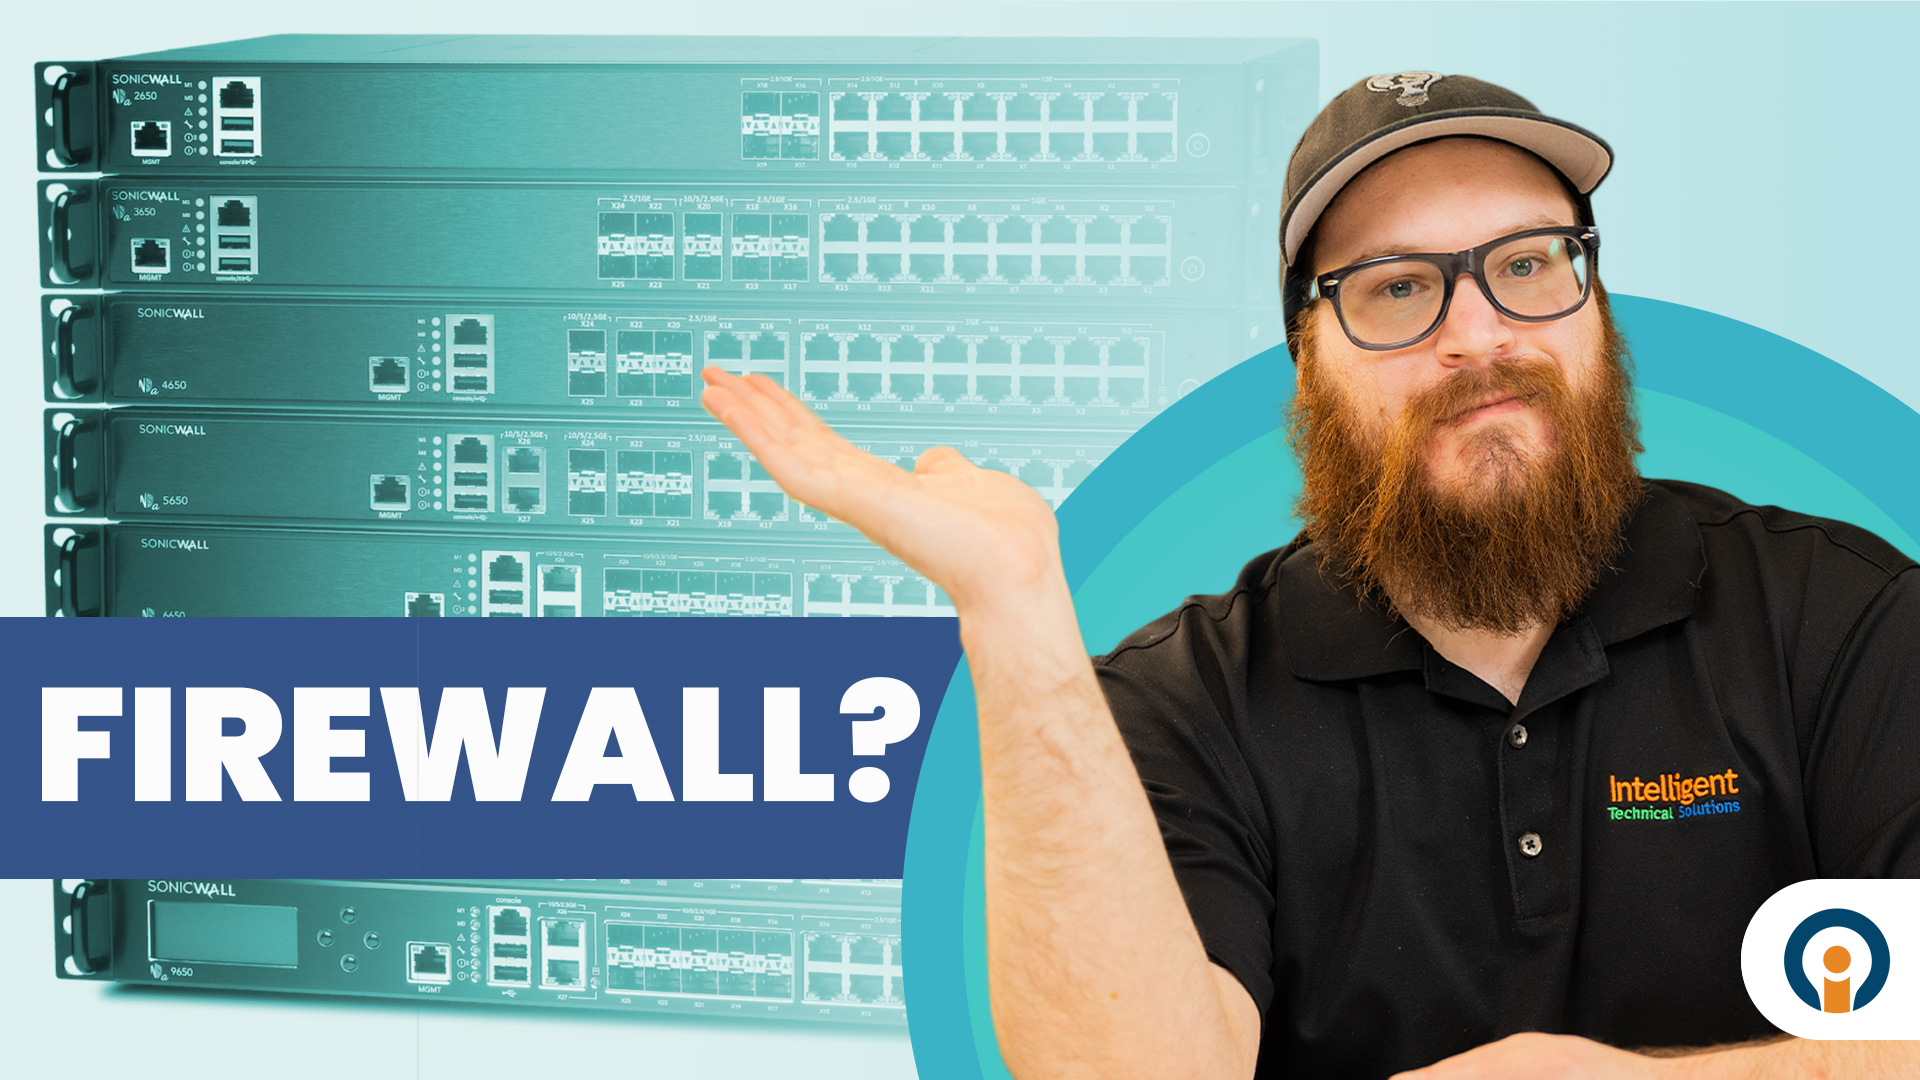 What does a firewall do